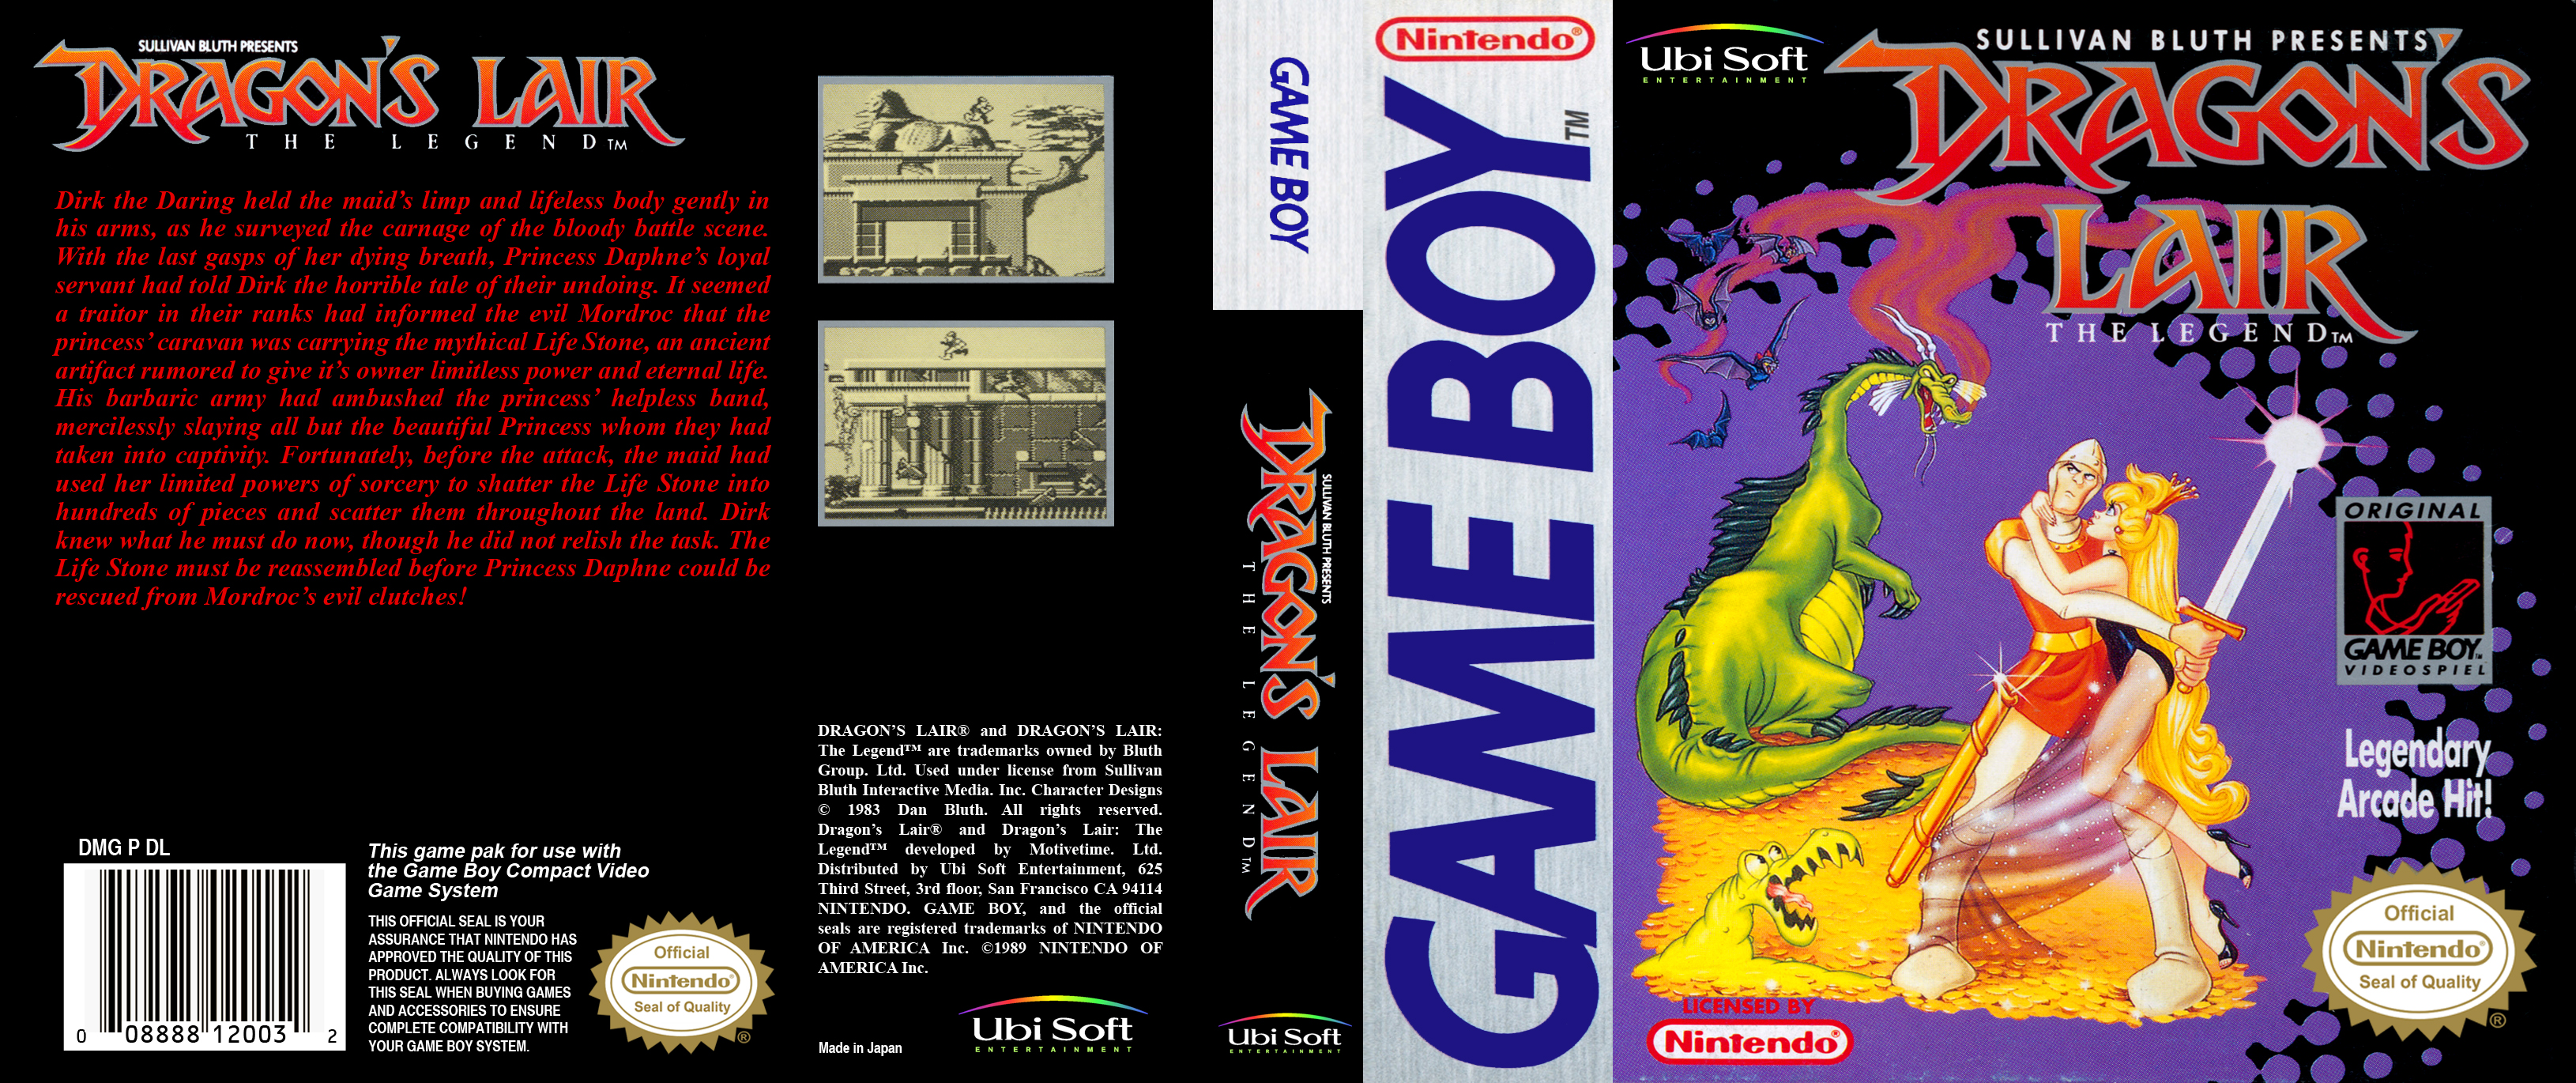 Dragon Slair Gameboy Covers Cover Century Over 500 000 Album Art Covers For Free